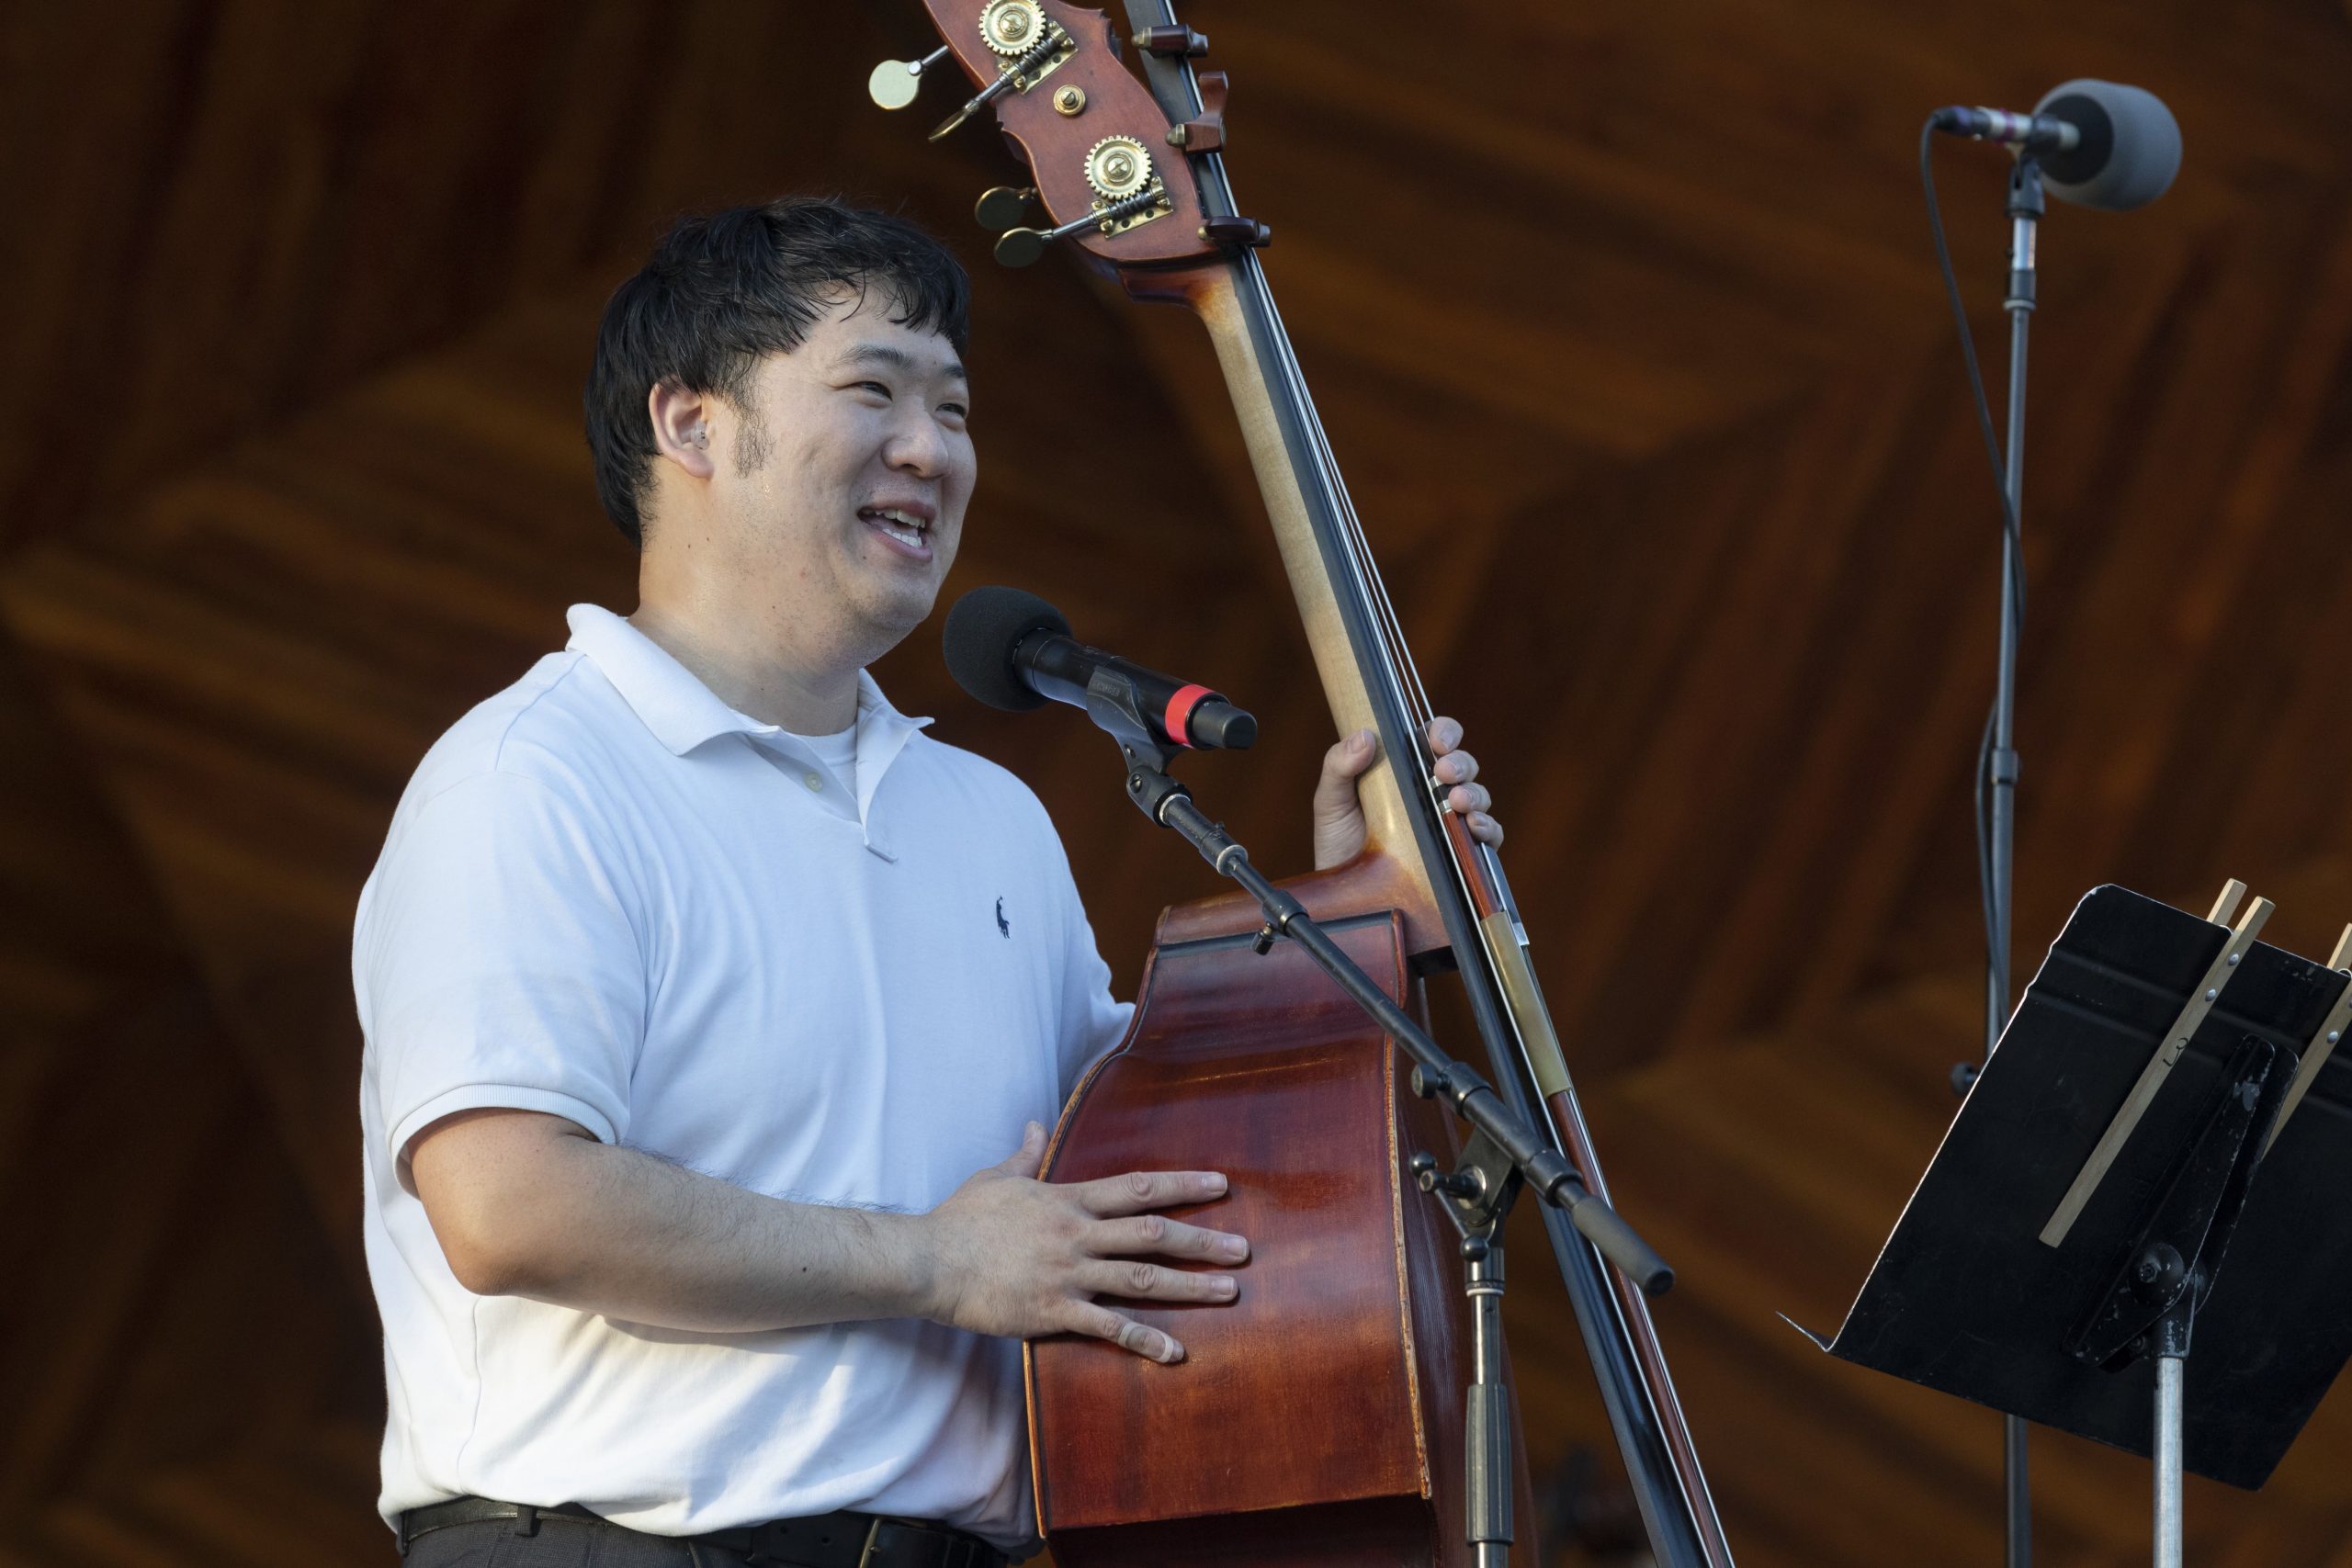 Bebo is onstage at the Hatch Shell, holding his Double Bass.